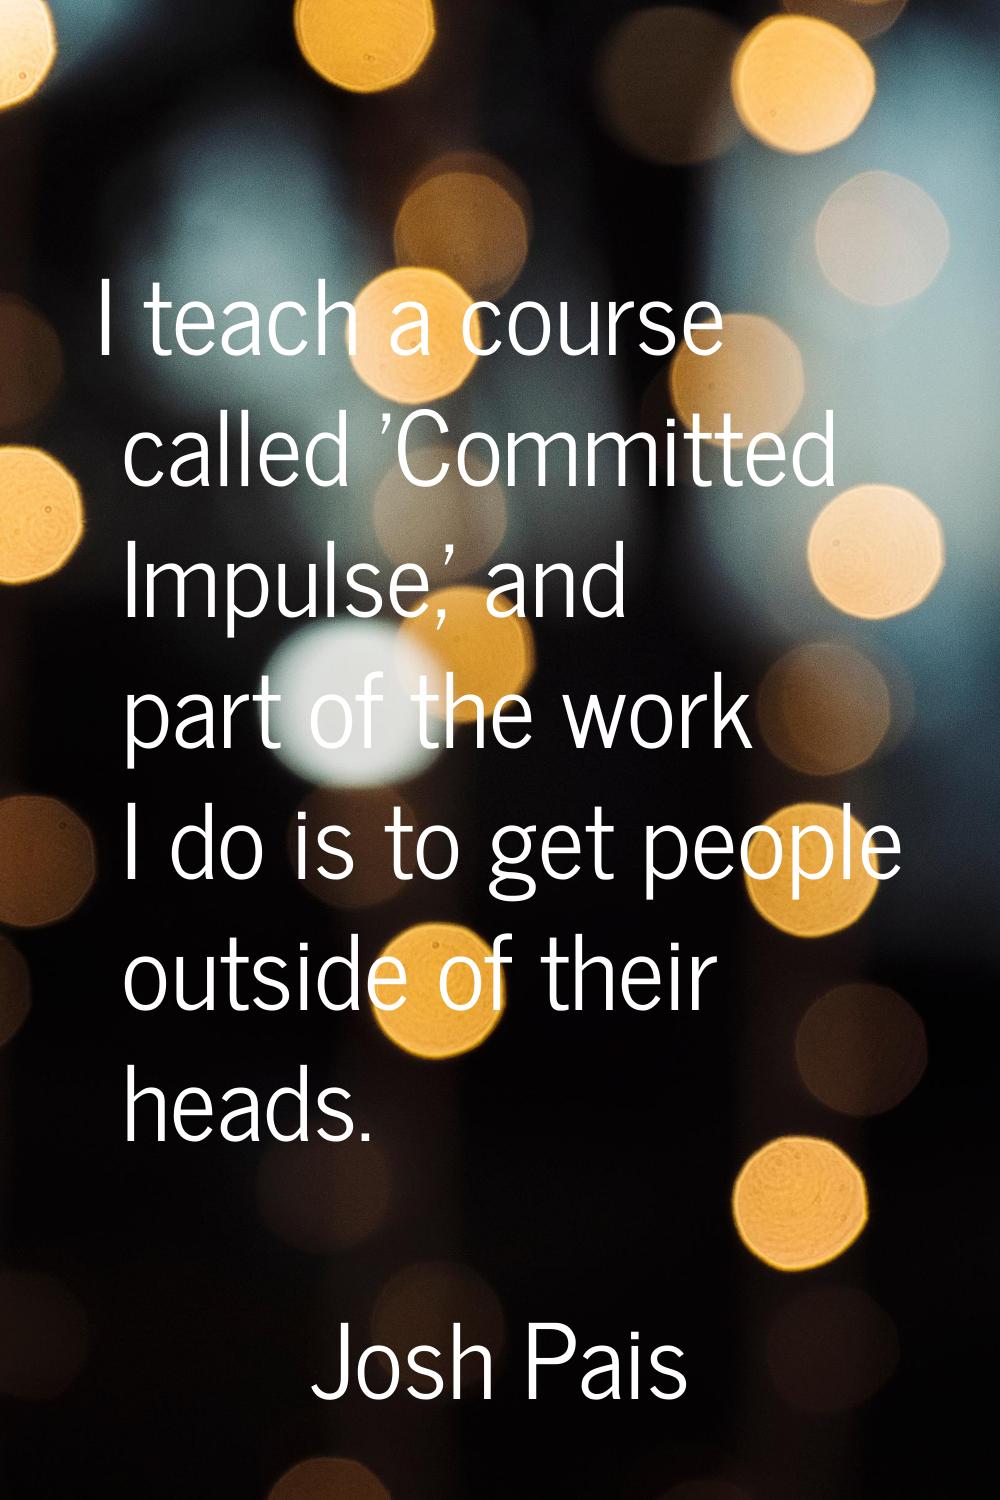 I teach a course called 'Committed Impulse,' and part of the work I do is to get people outside of 